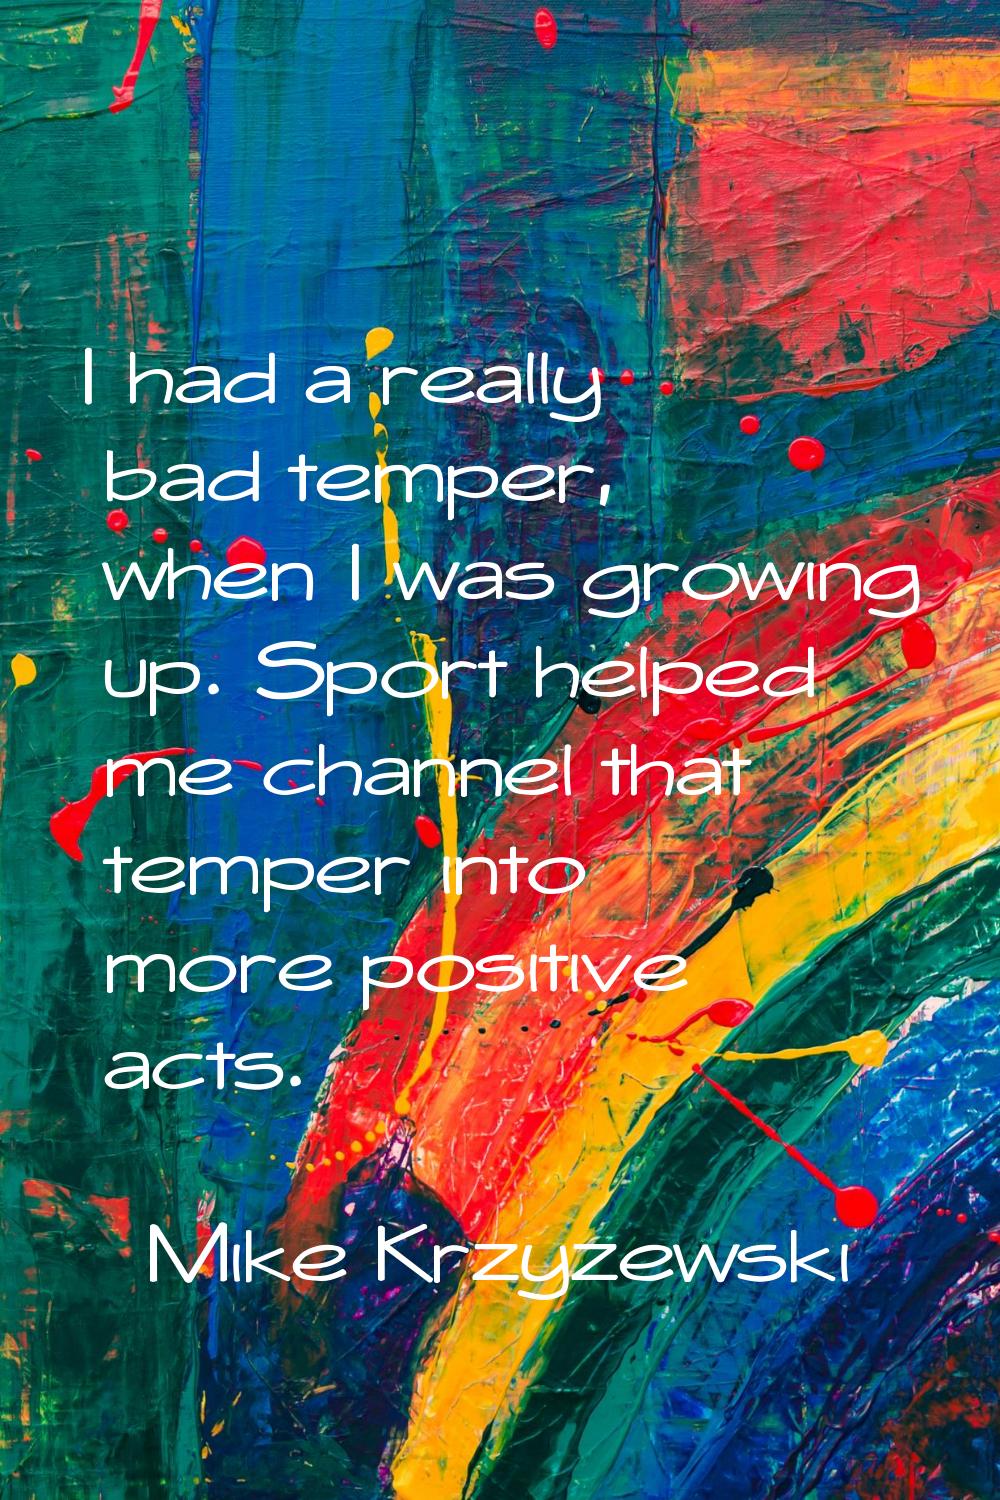 I had a really bad temper, when I was growing up. Sport helped me channel that temper into more pos